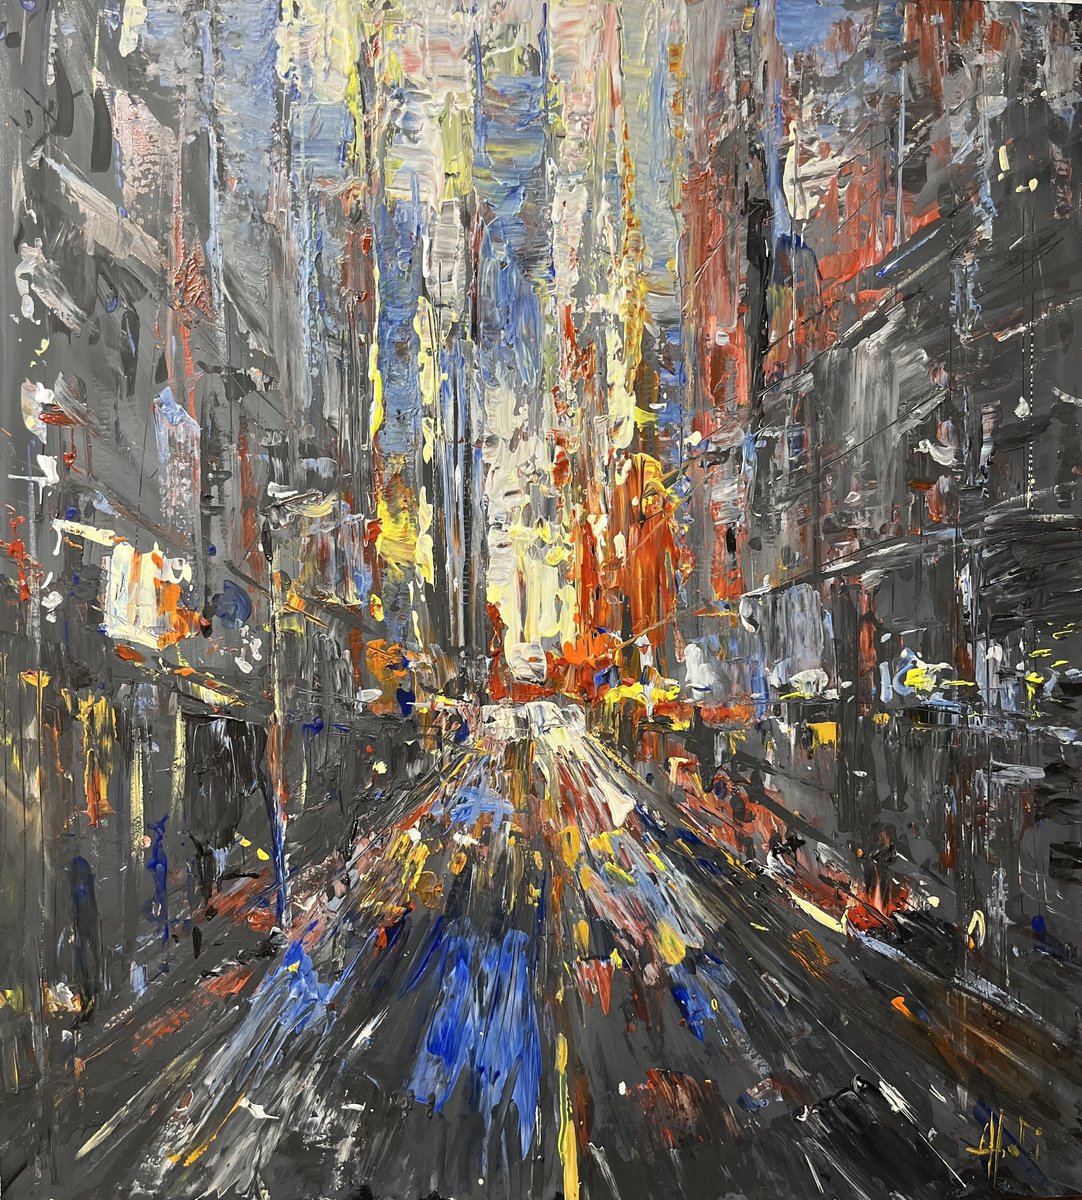 CITY LIGHTS 2, abstract impressionist painting 70x65cm by Altin Furxhi